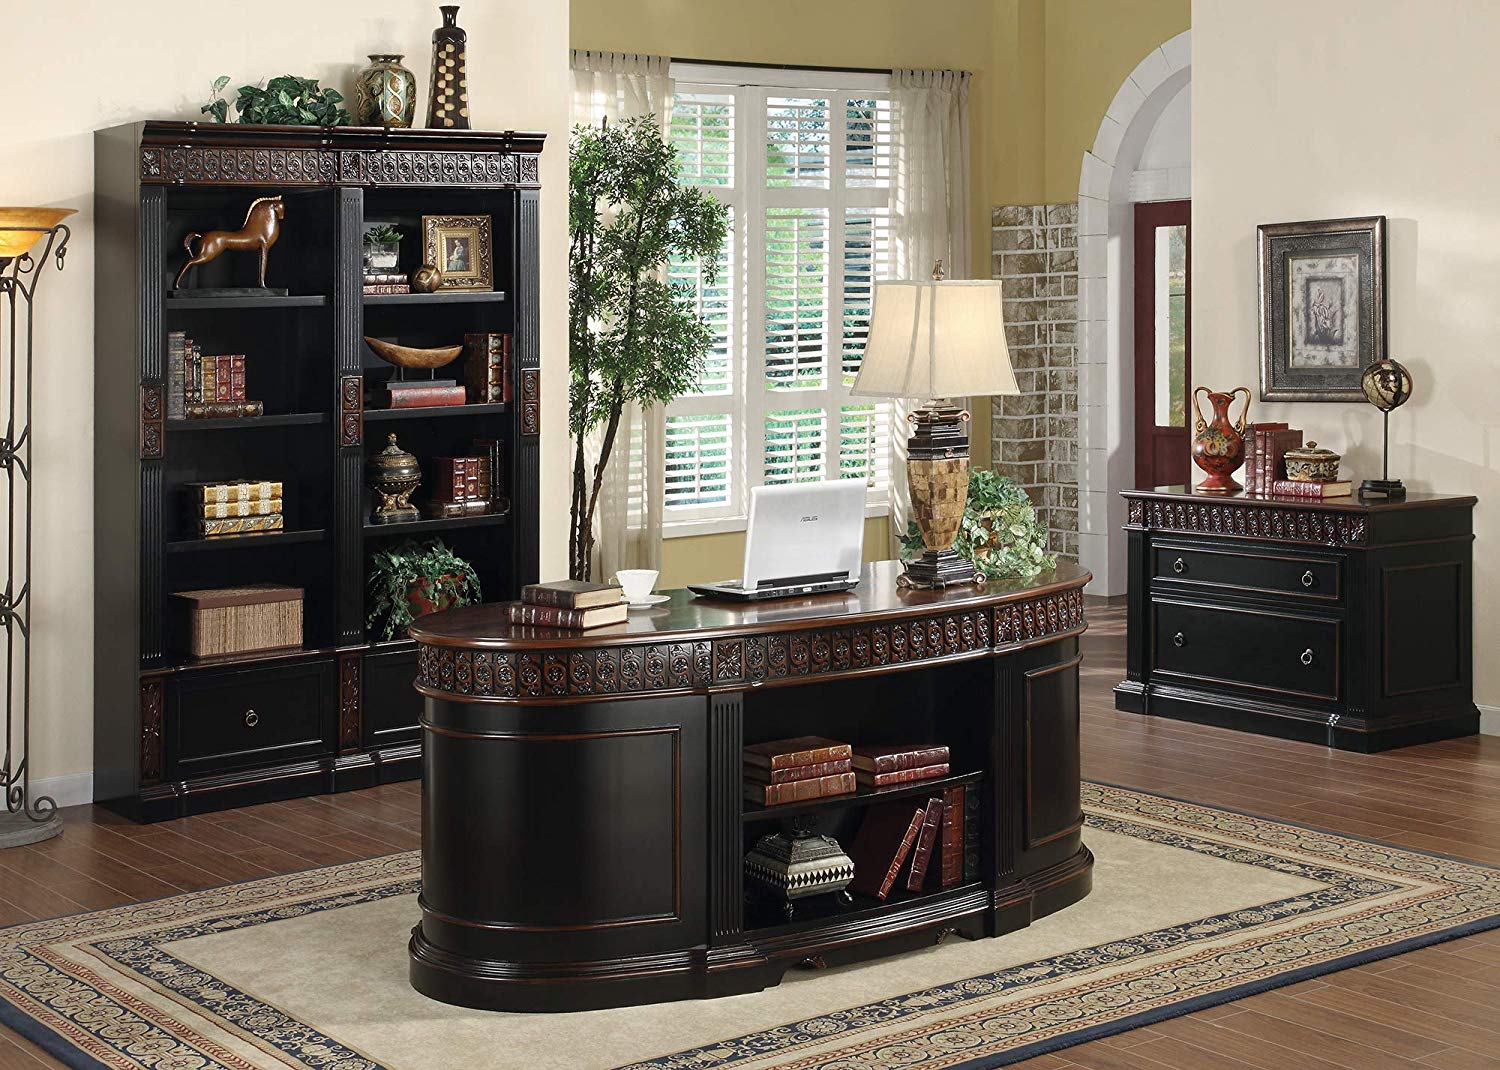 Roawn Oval Double Pedestal Executive desk Black and Chestnut